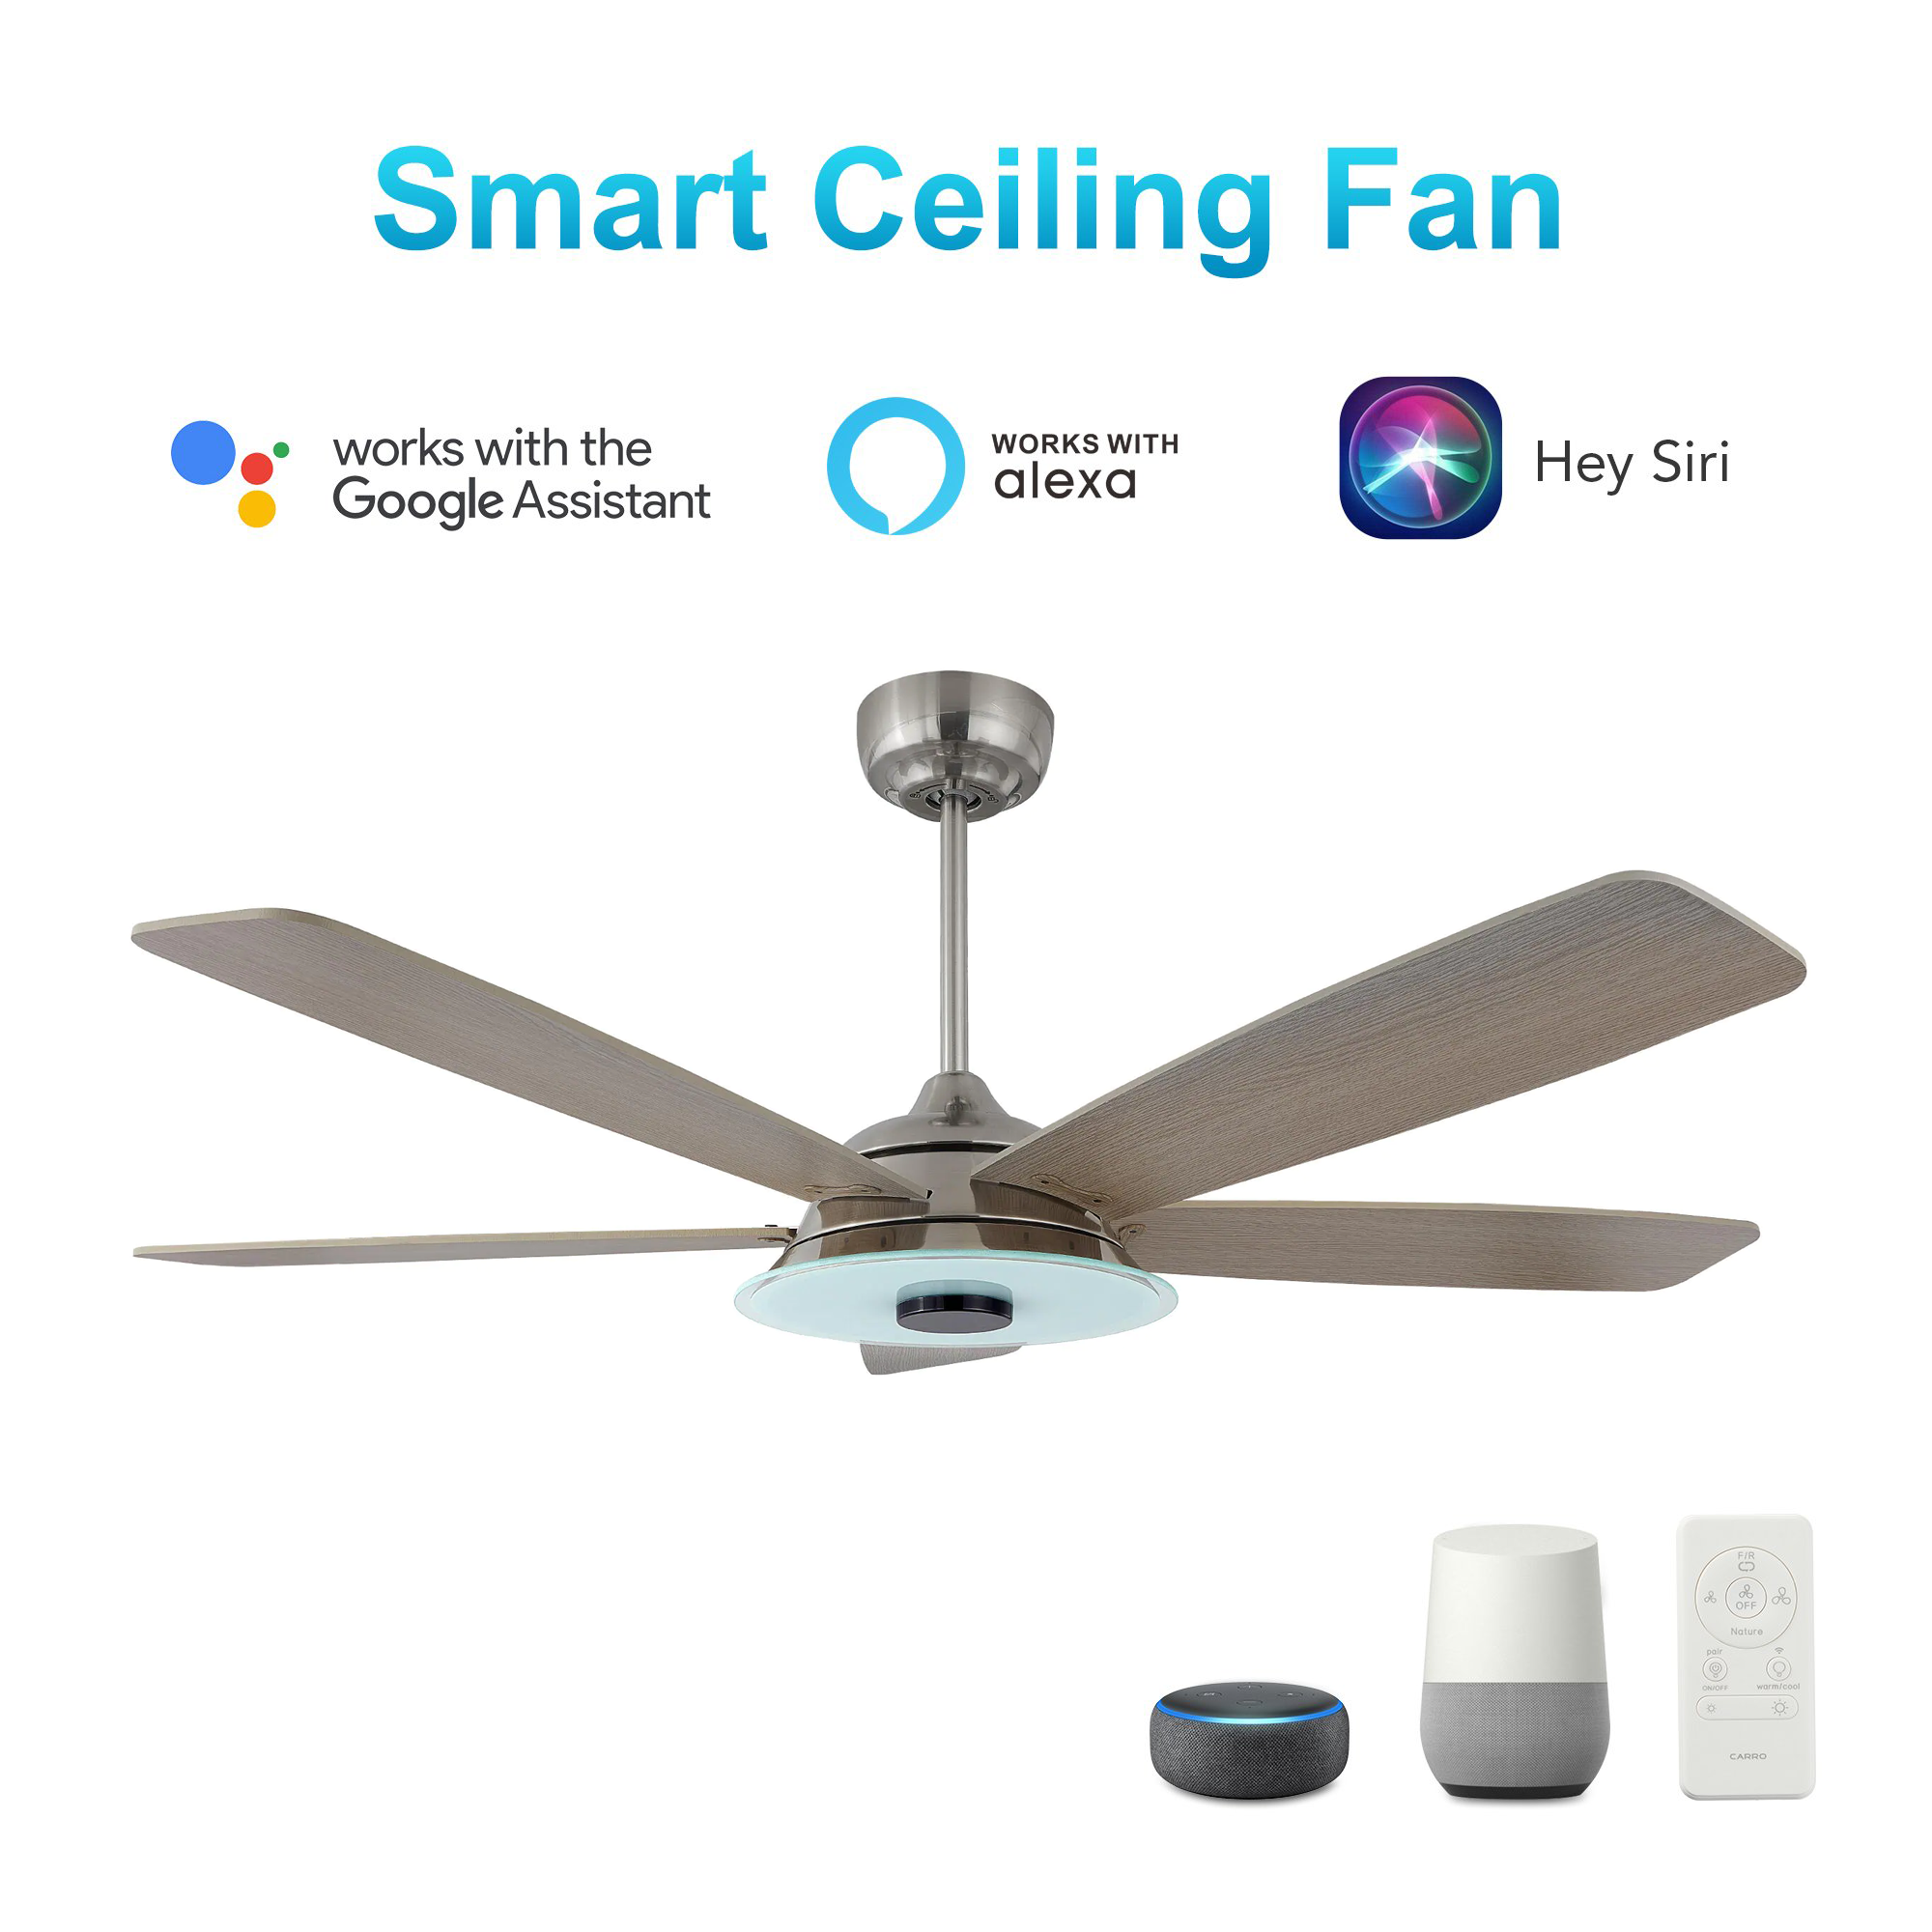 Striker Silver/Wood 5 Blade Smart Ceiling Fan with Dimmable LED Light Kit Works with Remote Control, Wi-Fi apps and Voice control via Google Assistant/Alexa/Siri